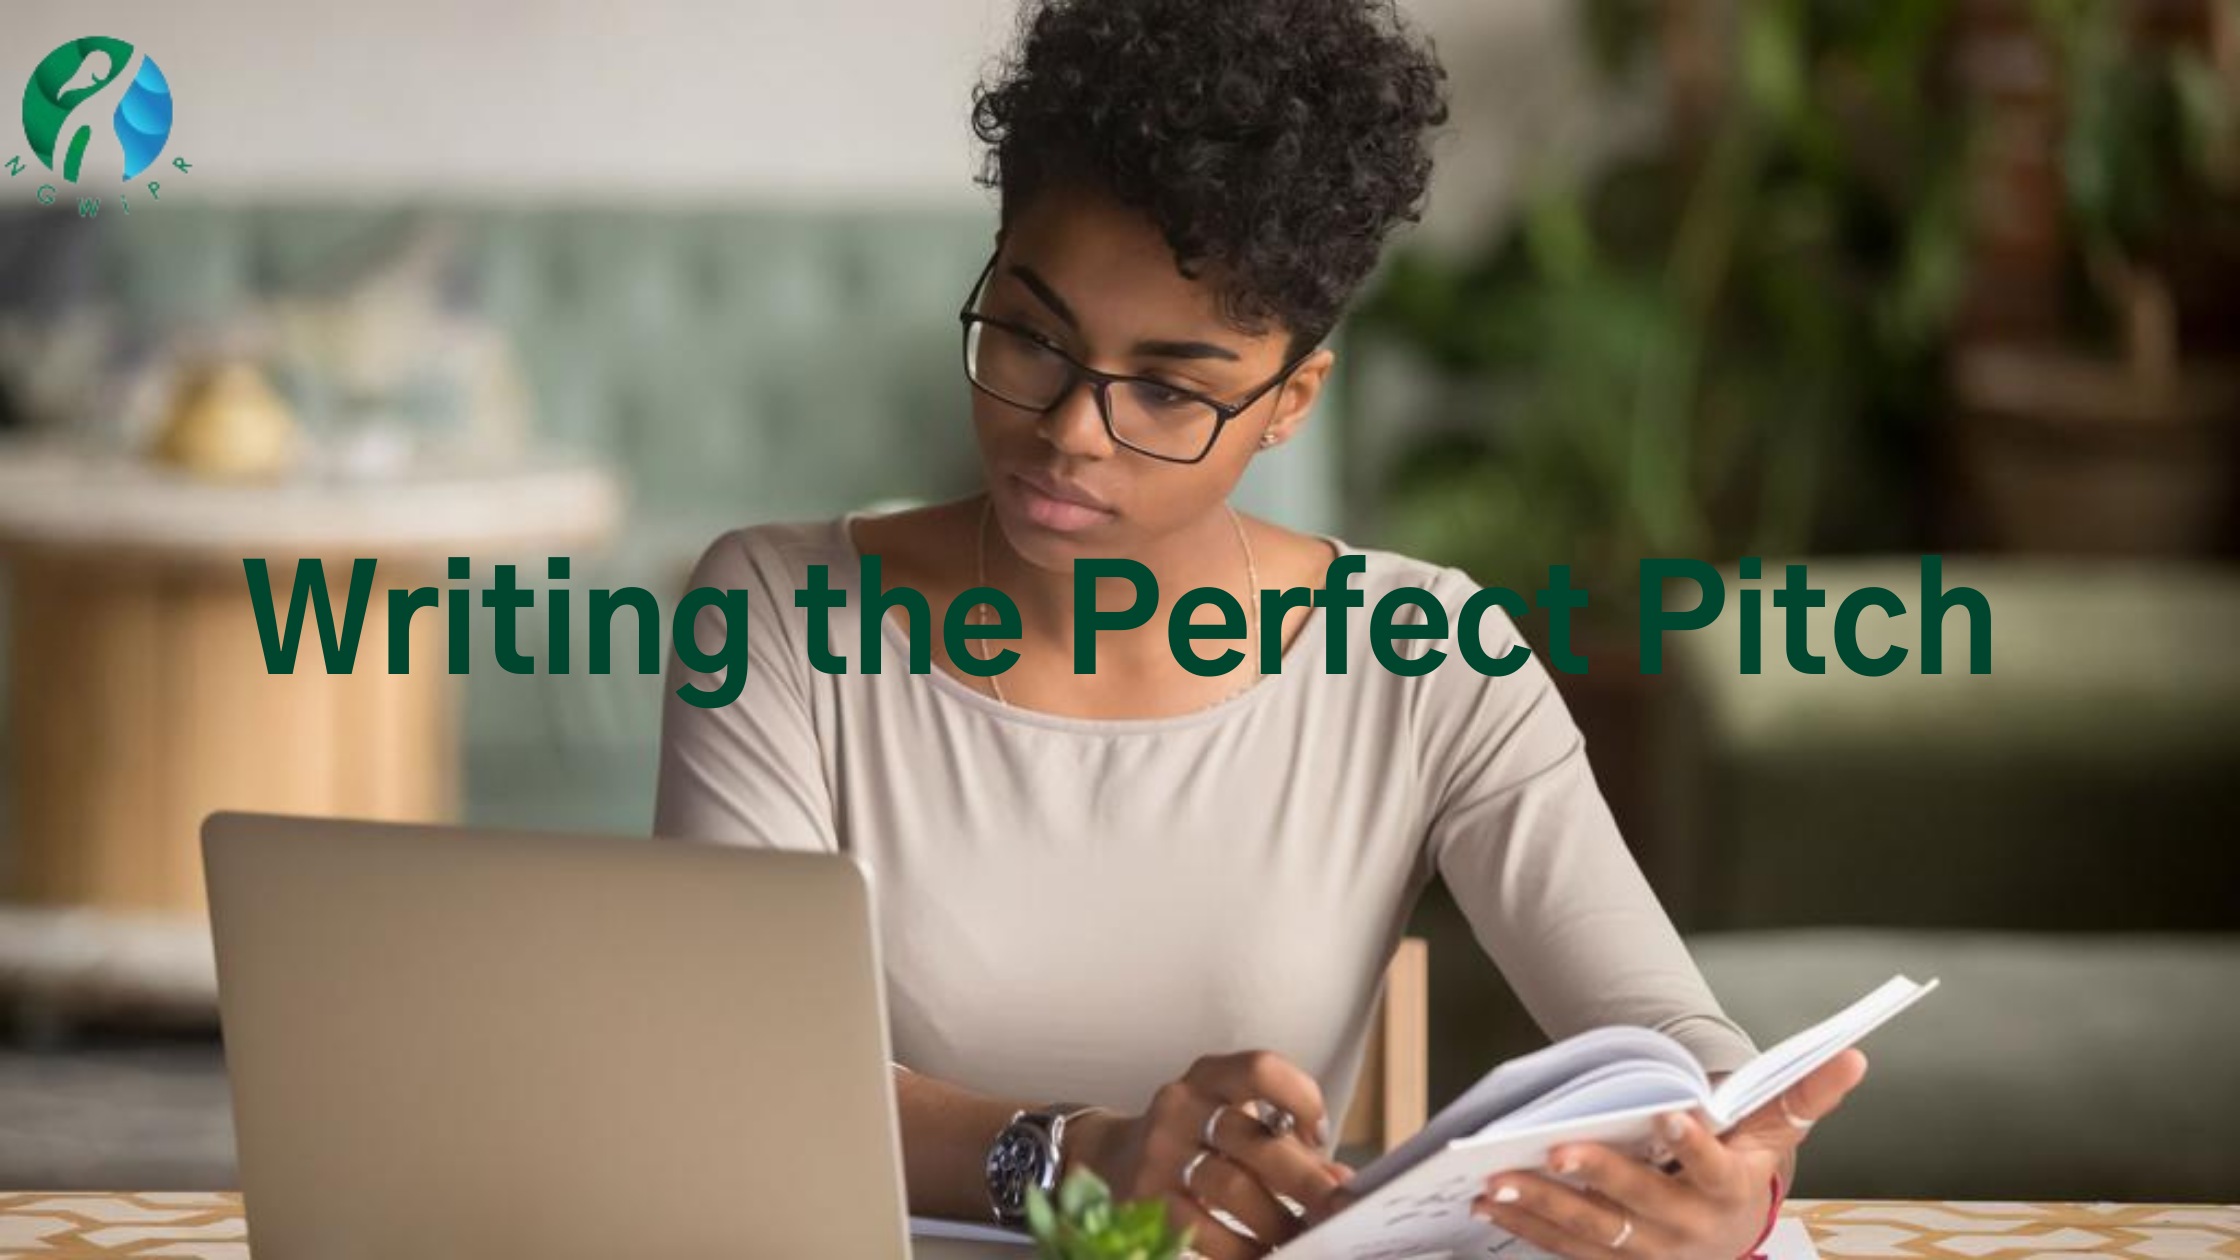 Writing the Perfect Pitch